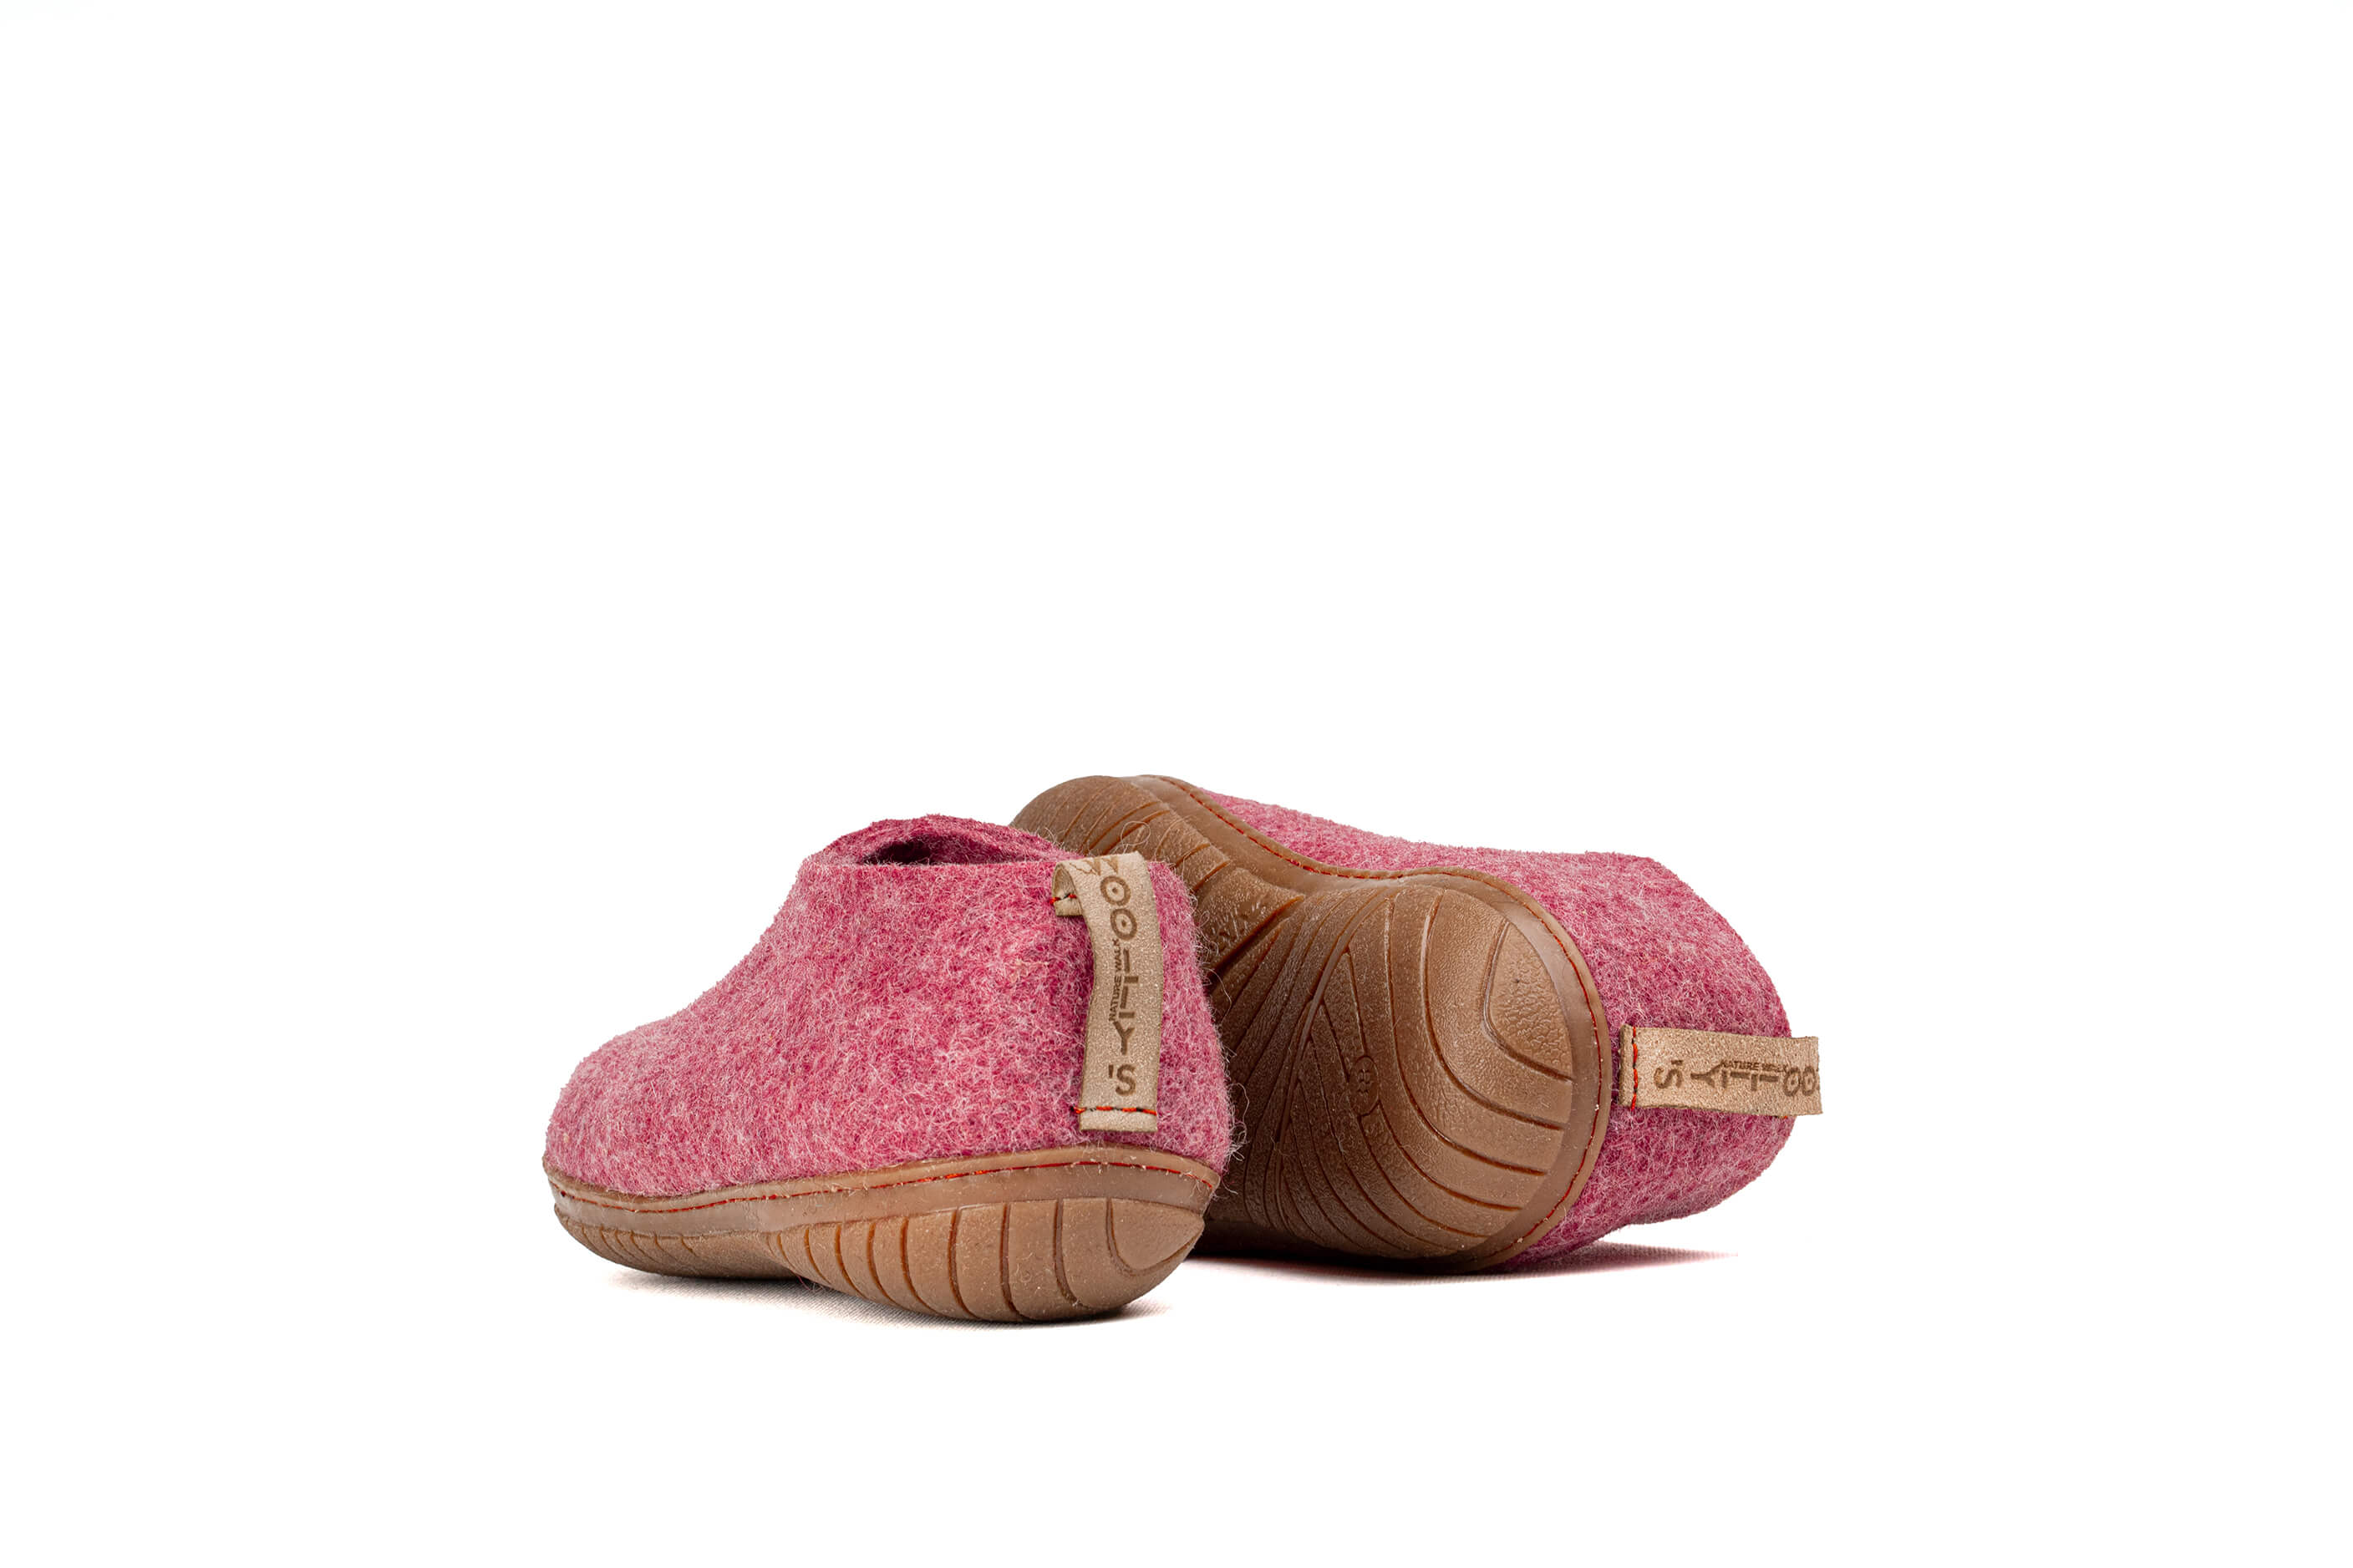 Woollyes Felt Outdoor Shoes Pairs  With Rubber Sole - Cherry Pink